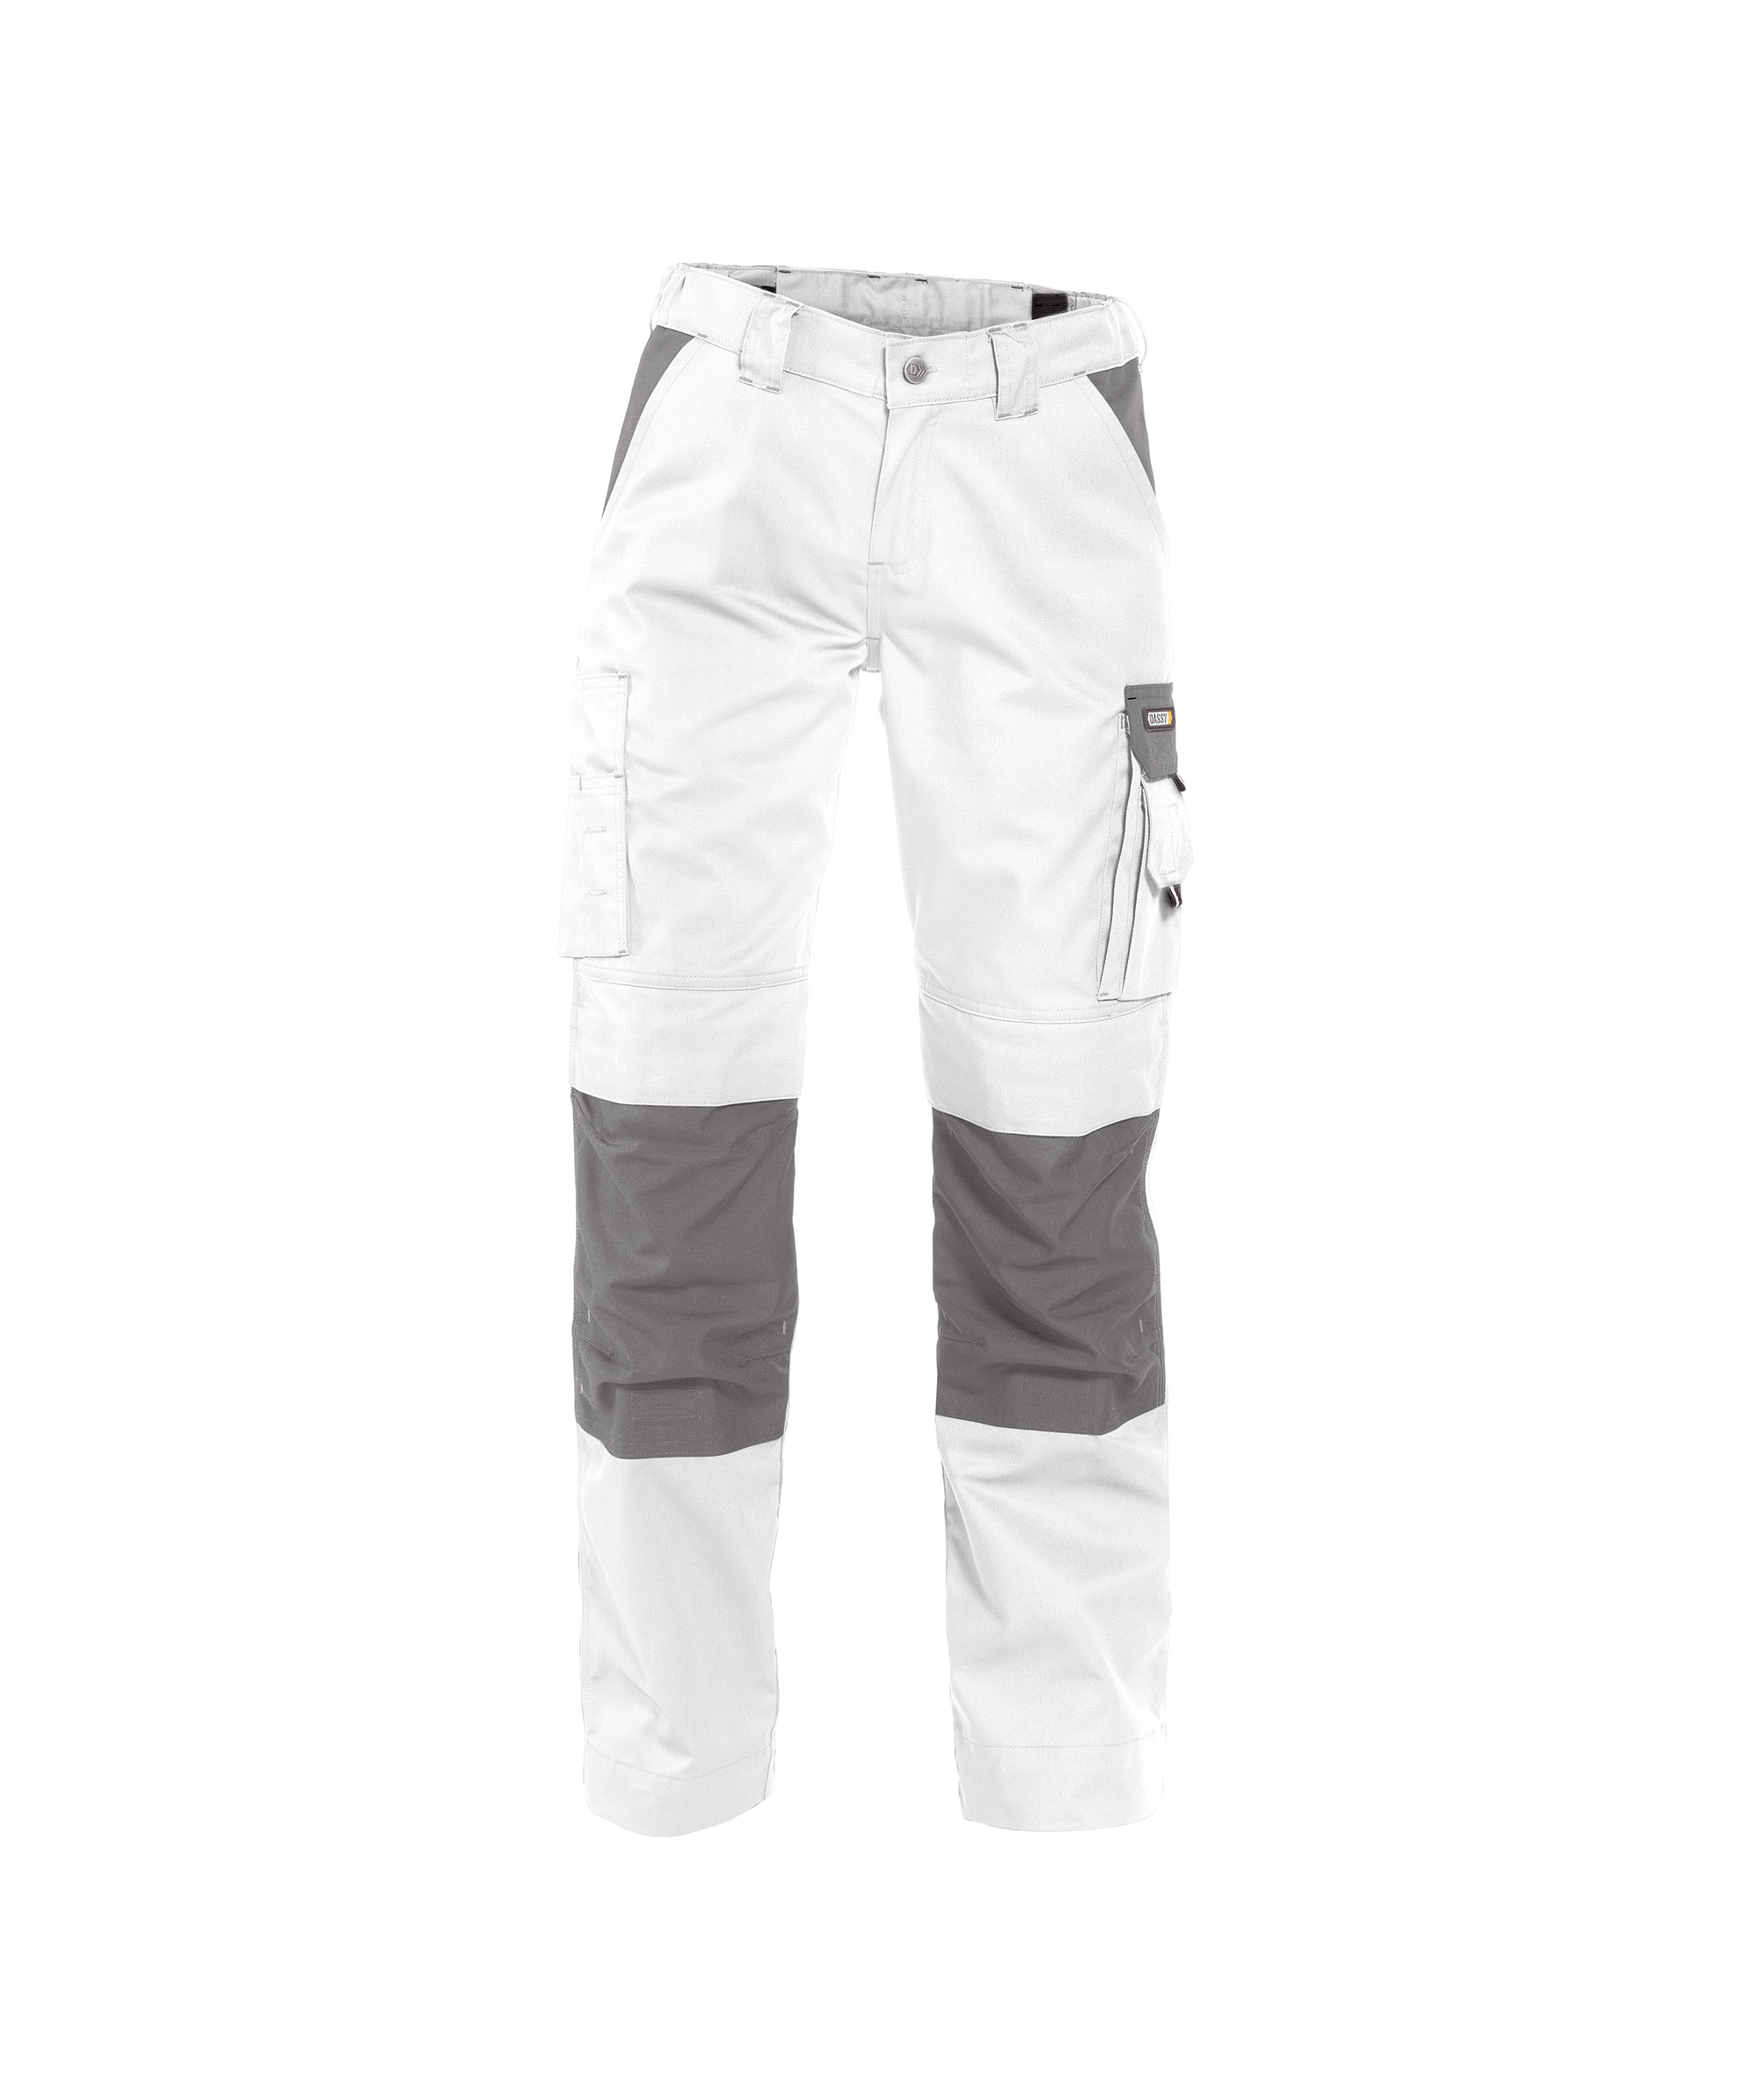 boston-women_two-tone-work-trousers-with-knee-pockets_white-cement-grey_front.jpg